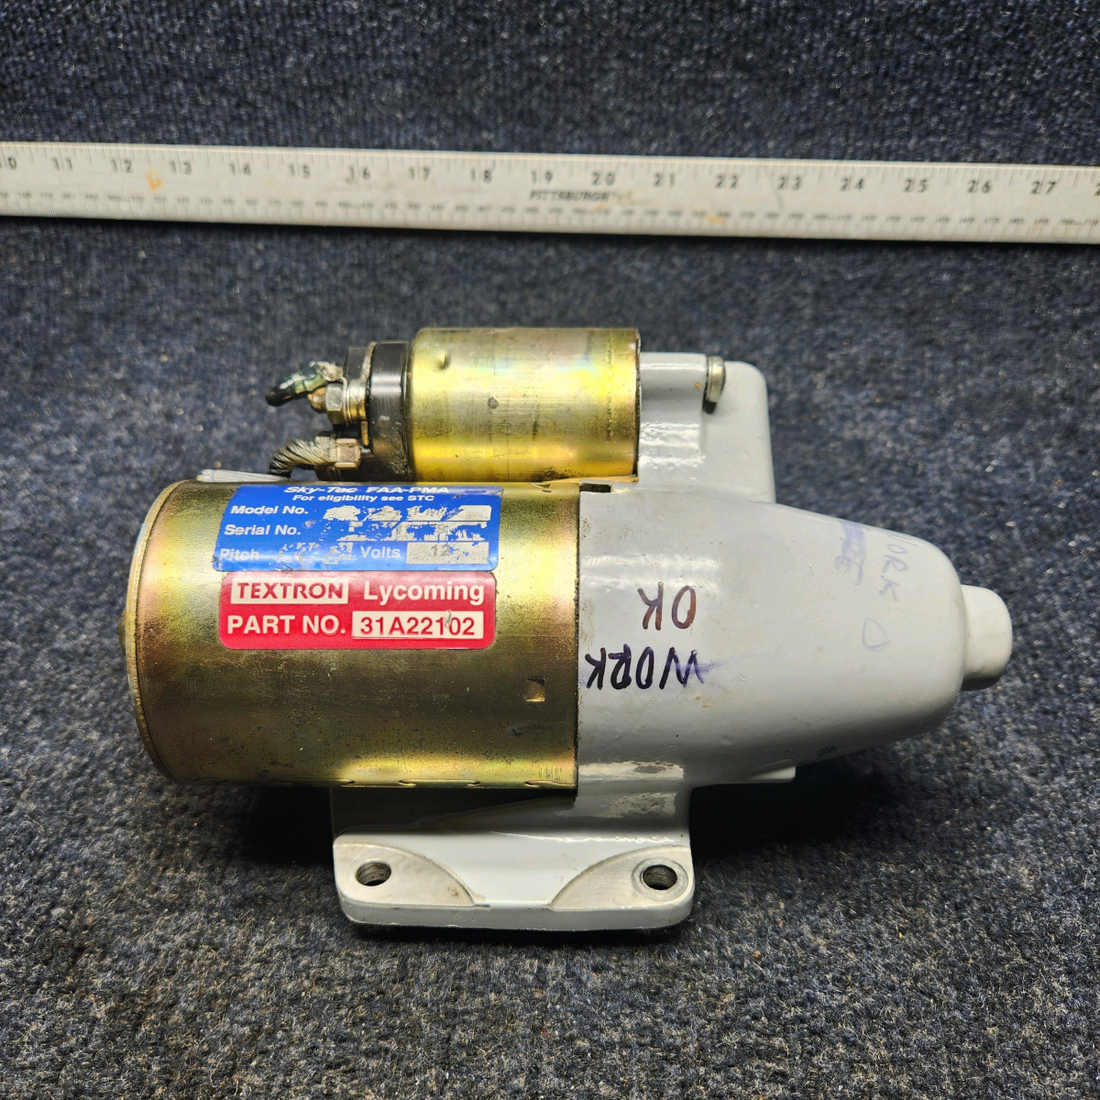 Used aircraft parts for sale, 31A22102 SKY-TEC Texas Several LYCOMING STARTER SKY TEC 24-12VOLTS